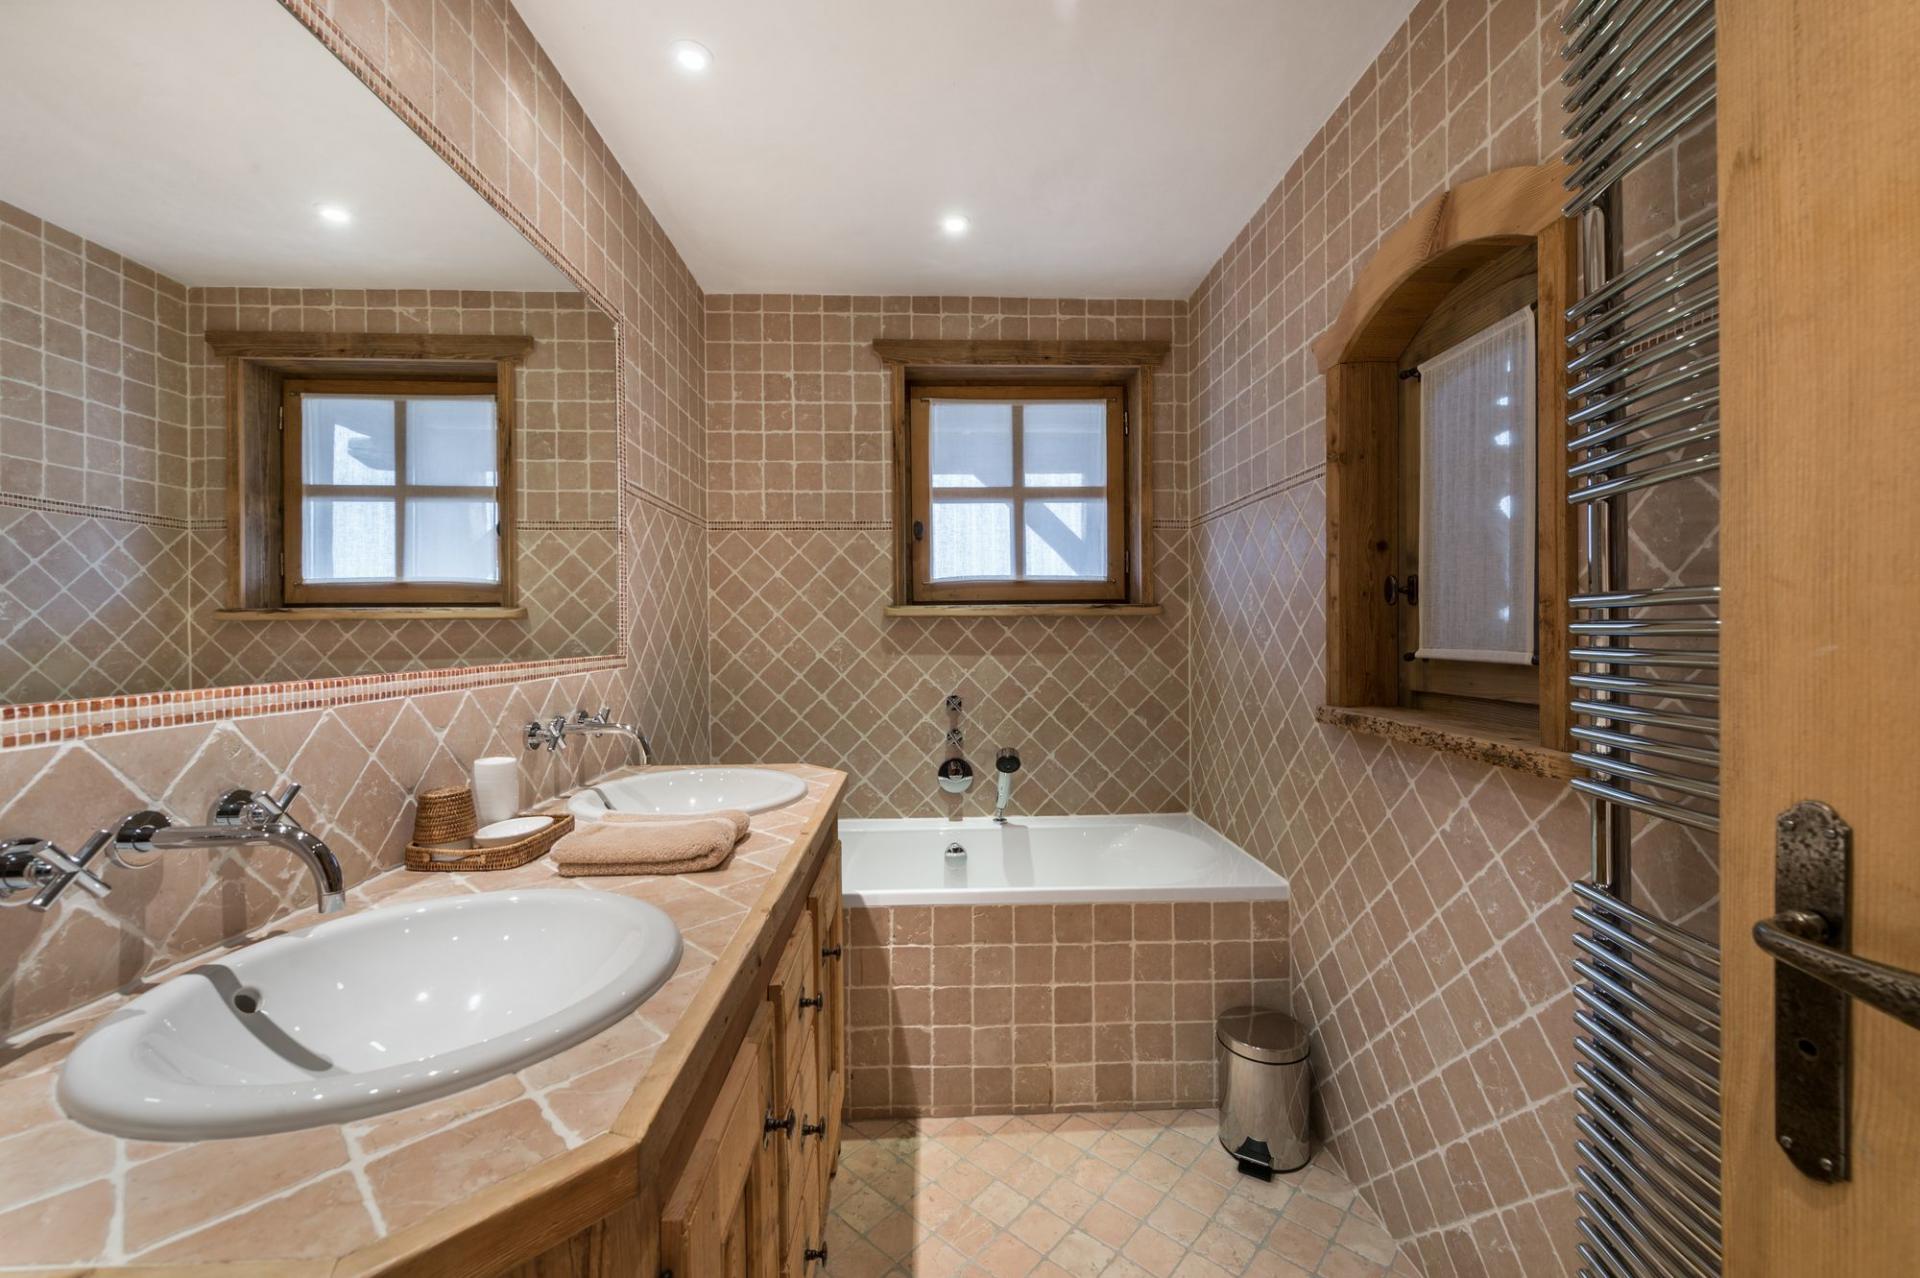 ANOTHER BATHROOM IN CHALET BELLECOTE IN THE FRENCH ALPS